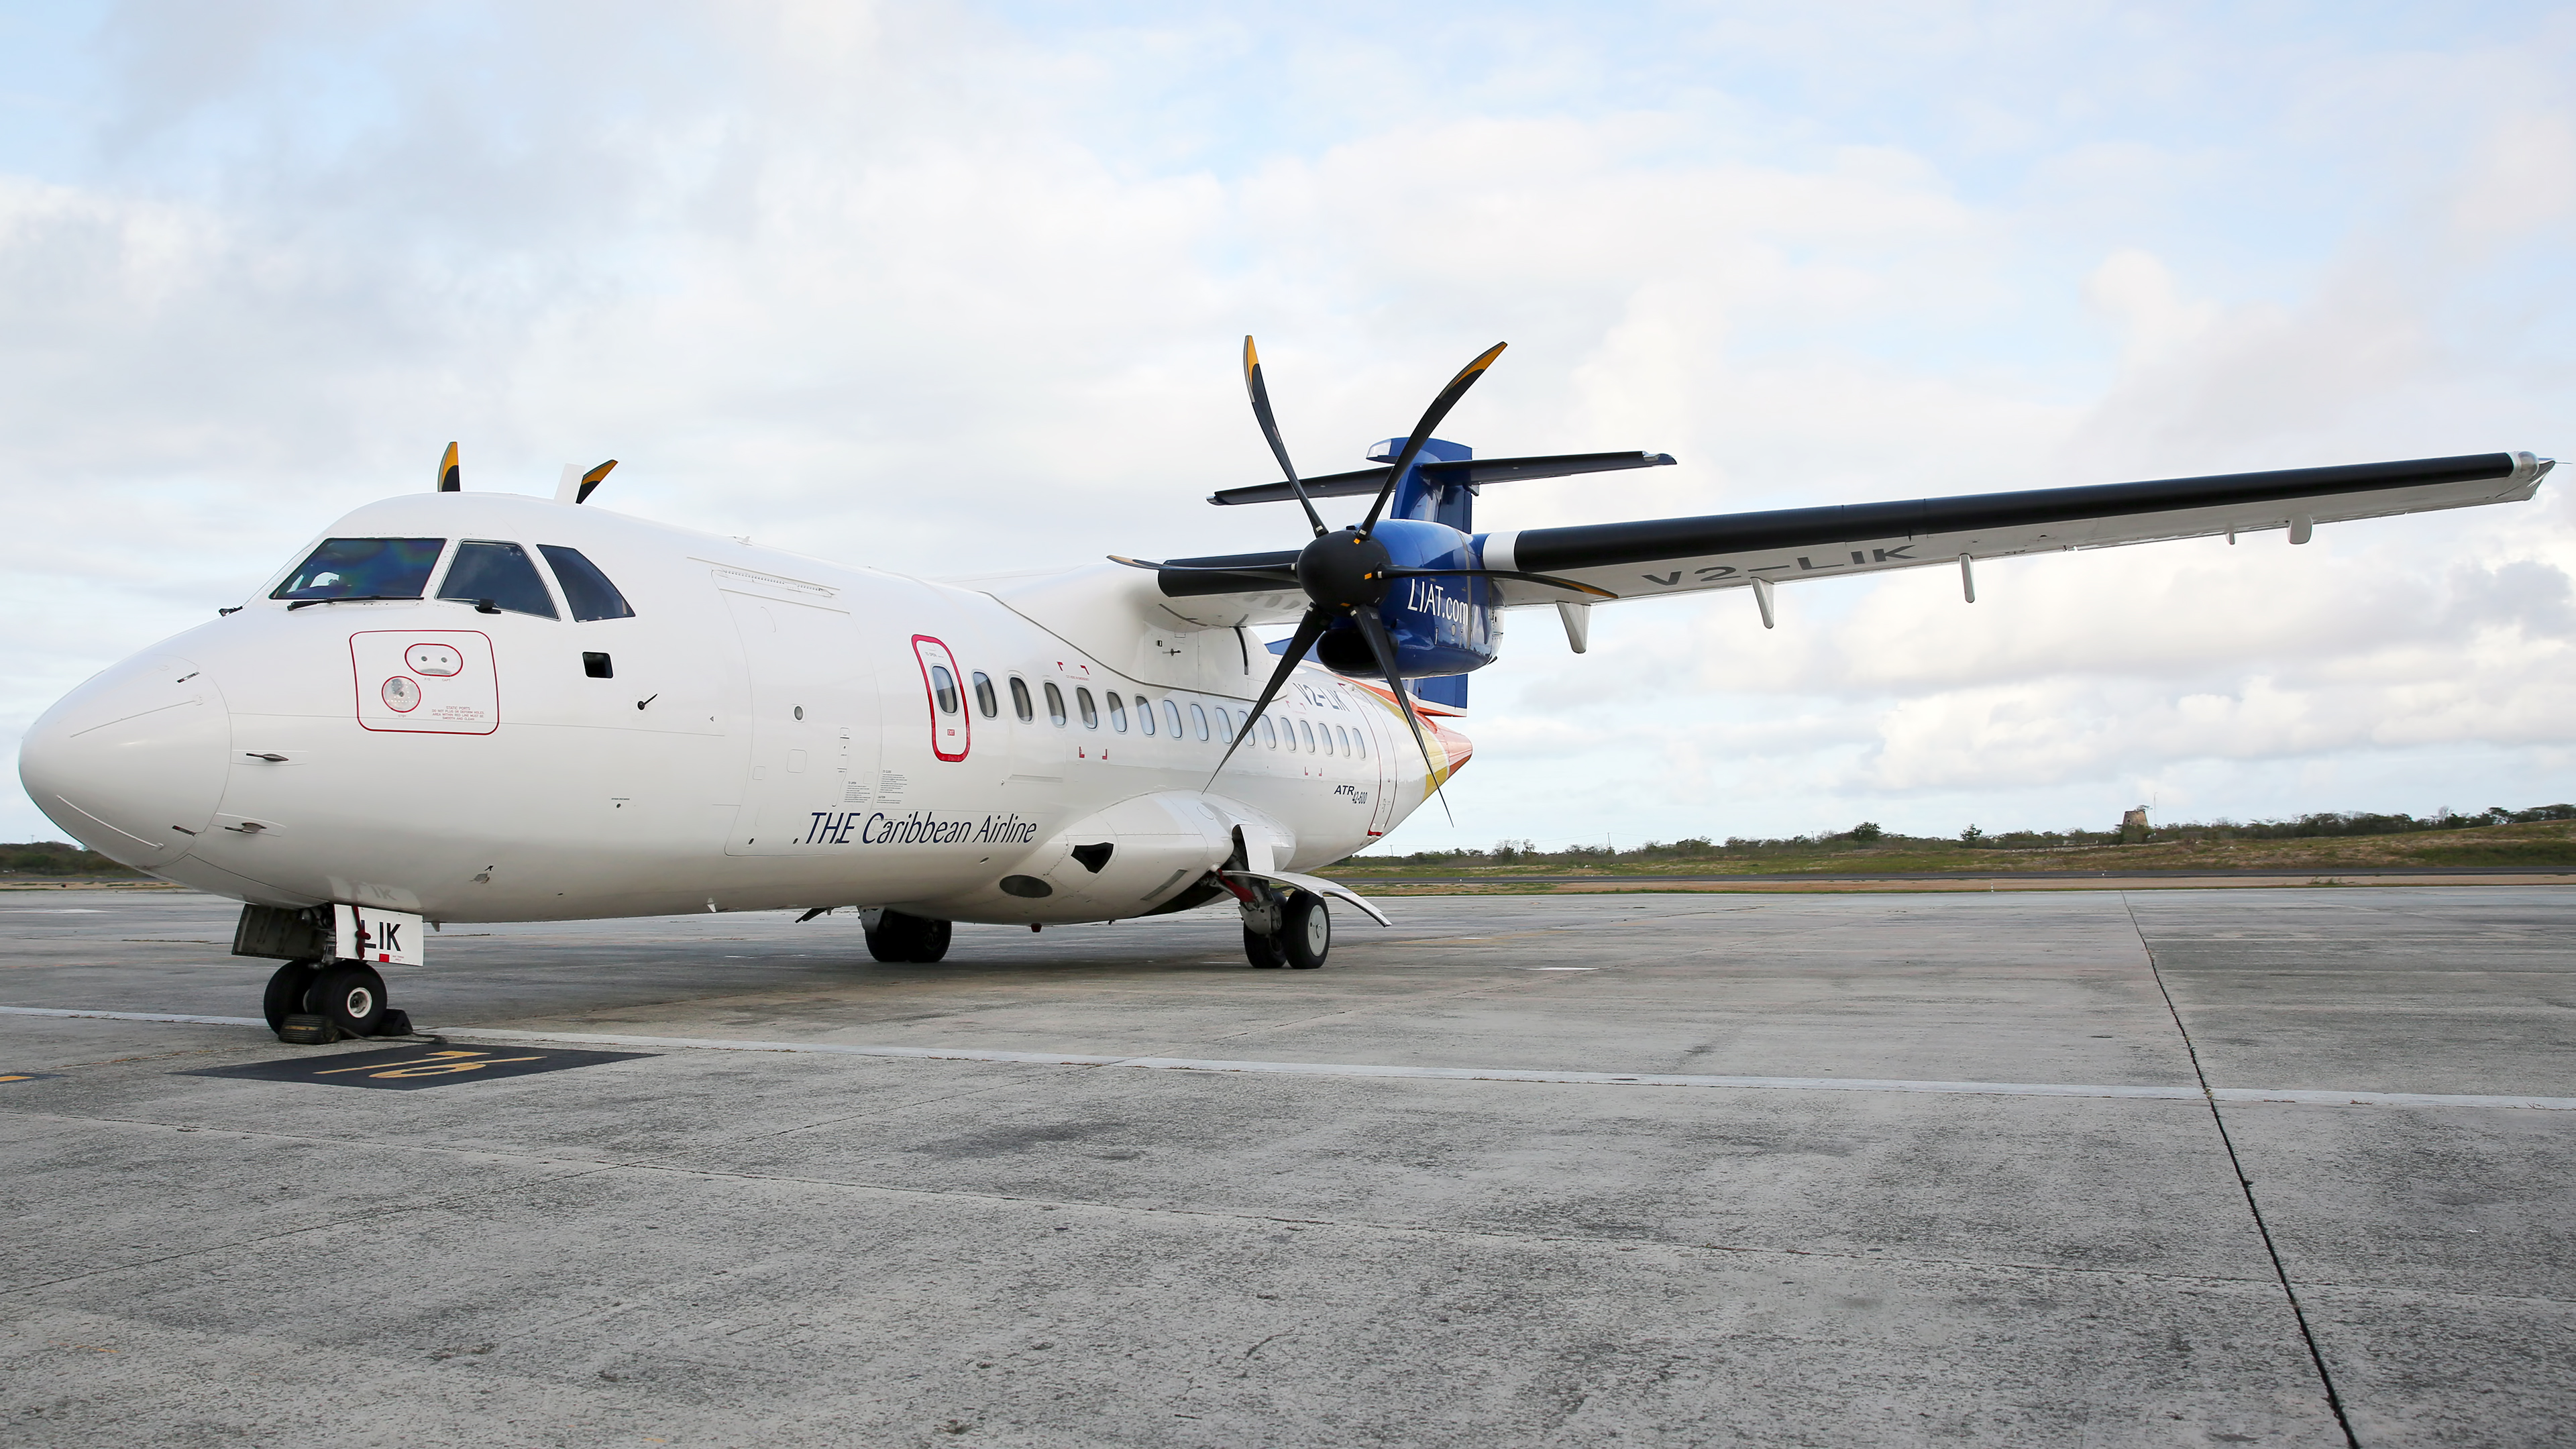 General 3840x2160 Italian aircraft airport french aircraft turboprop airplane airline sky LIAT ATR clouds ATR 42 aircraft vehicle transport Antigua